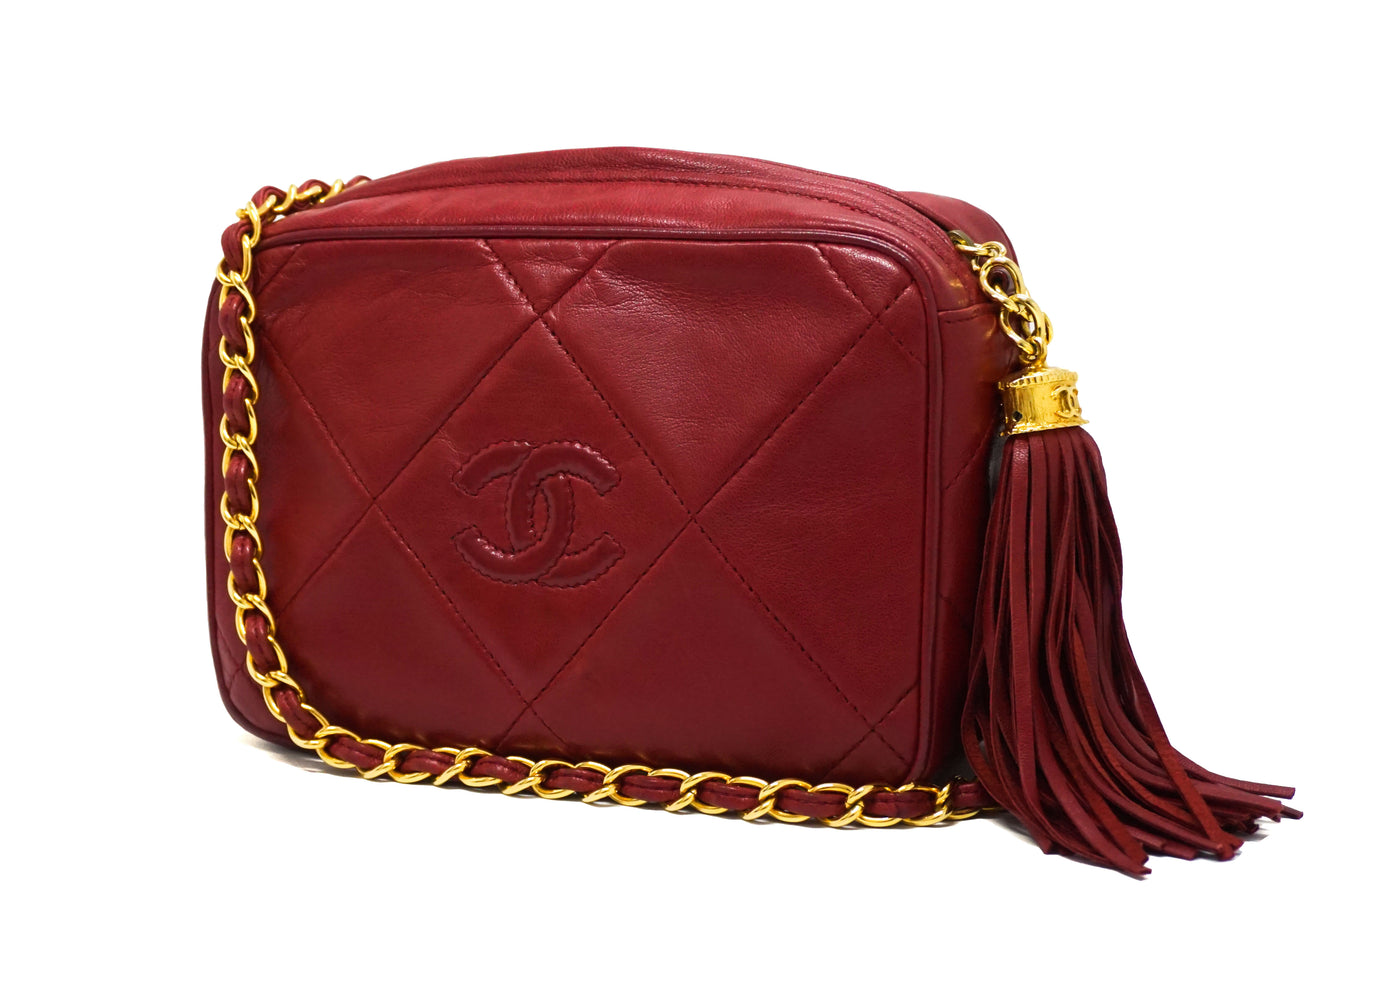 Chanel Vintage Rare Red Lambskin Classic Camera Bag